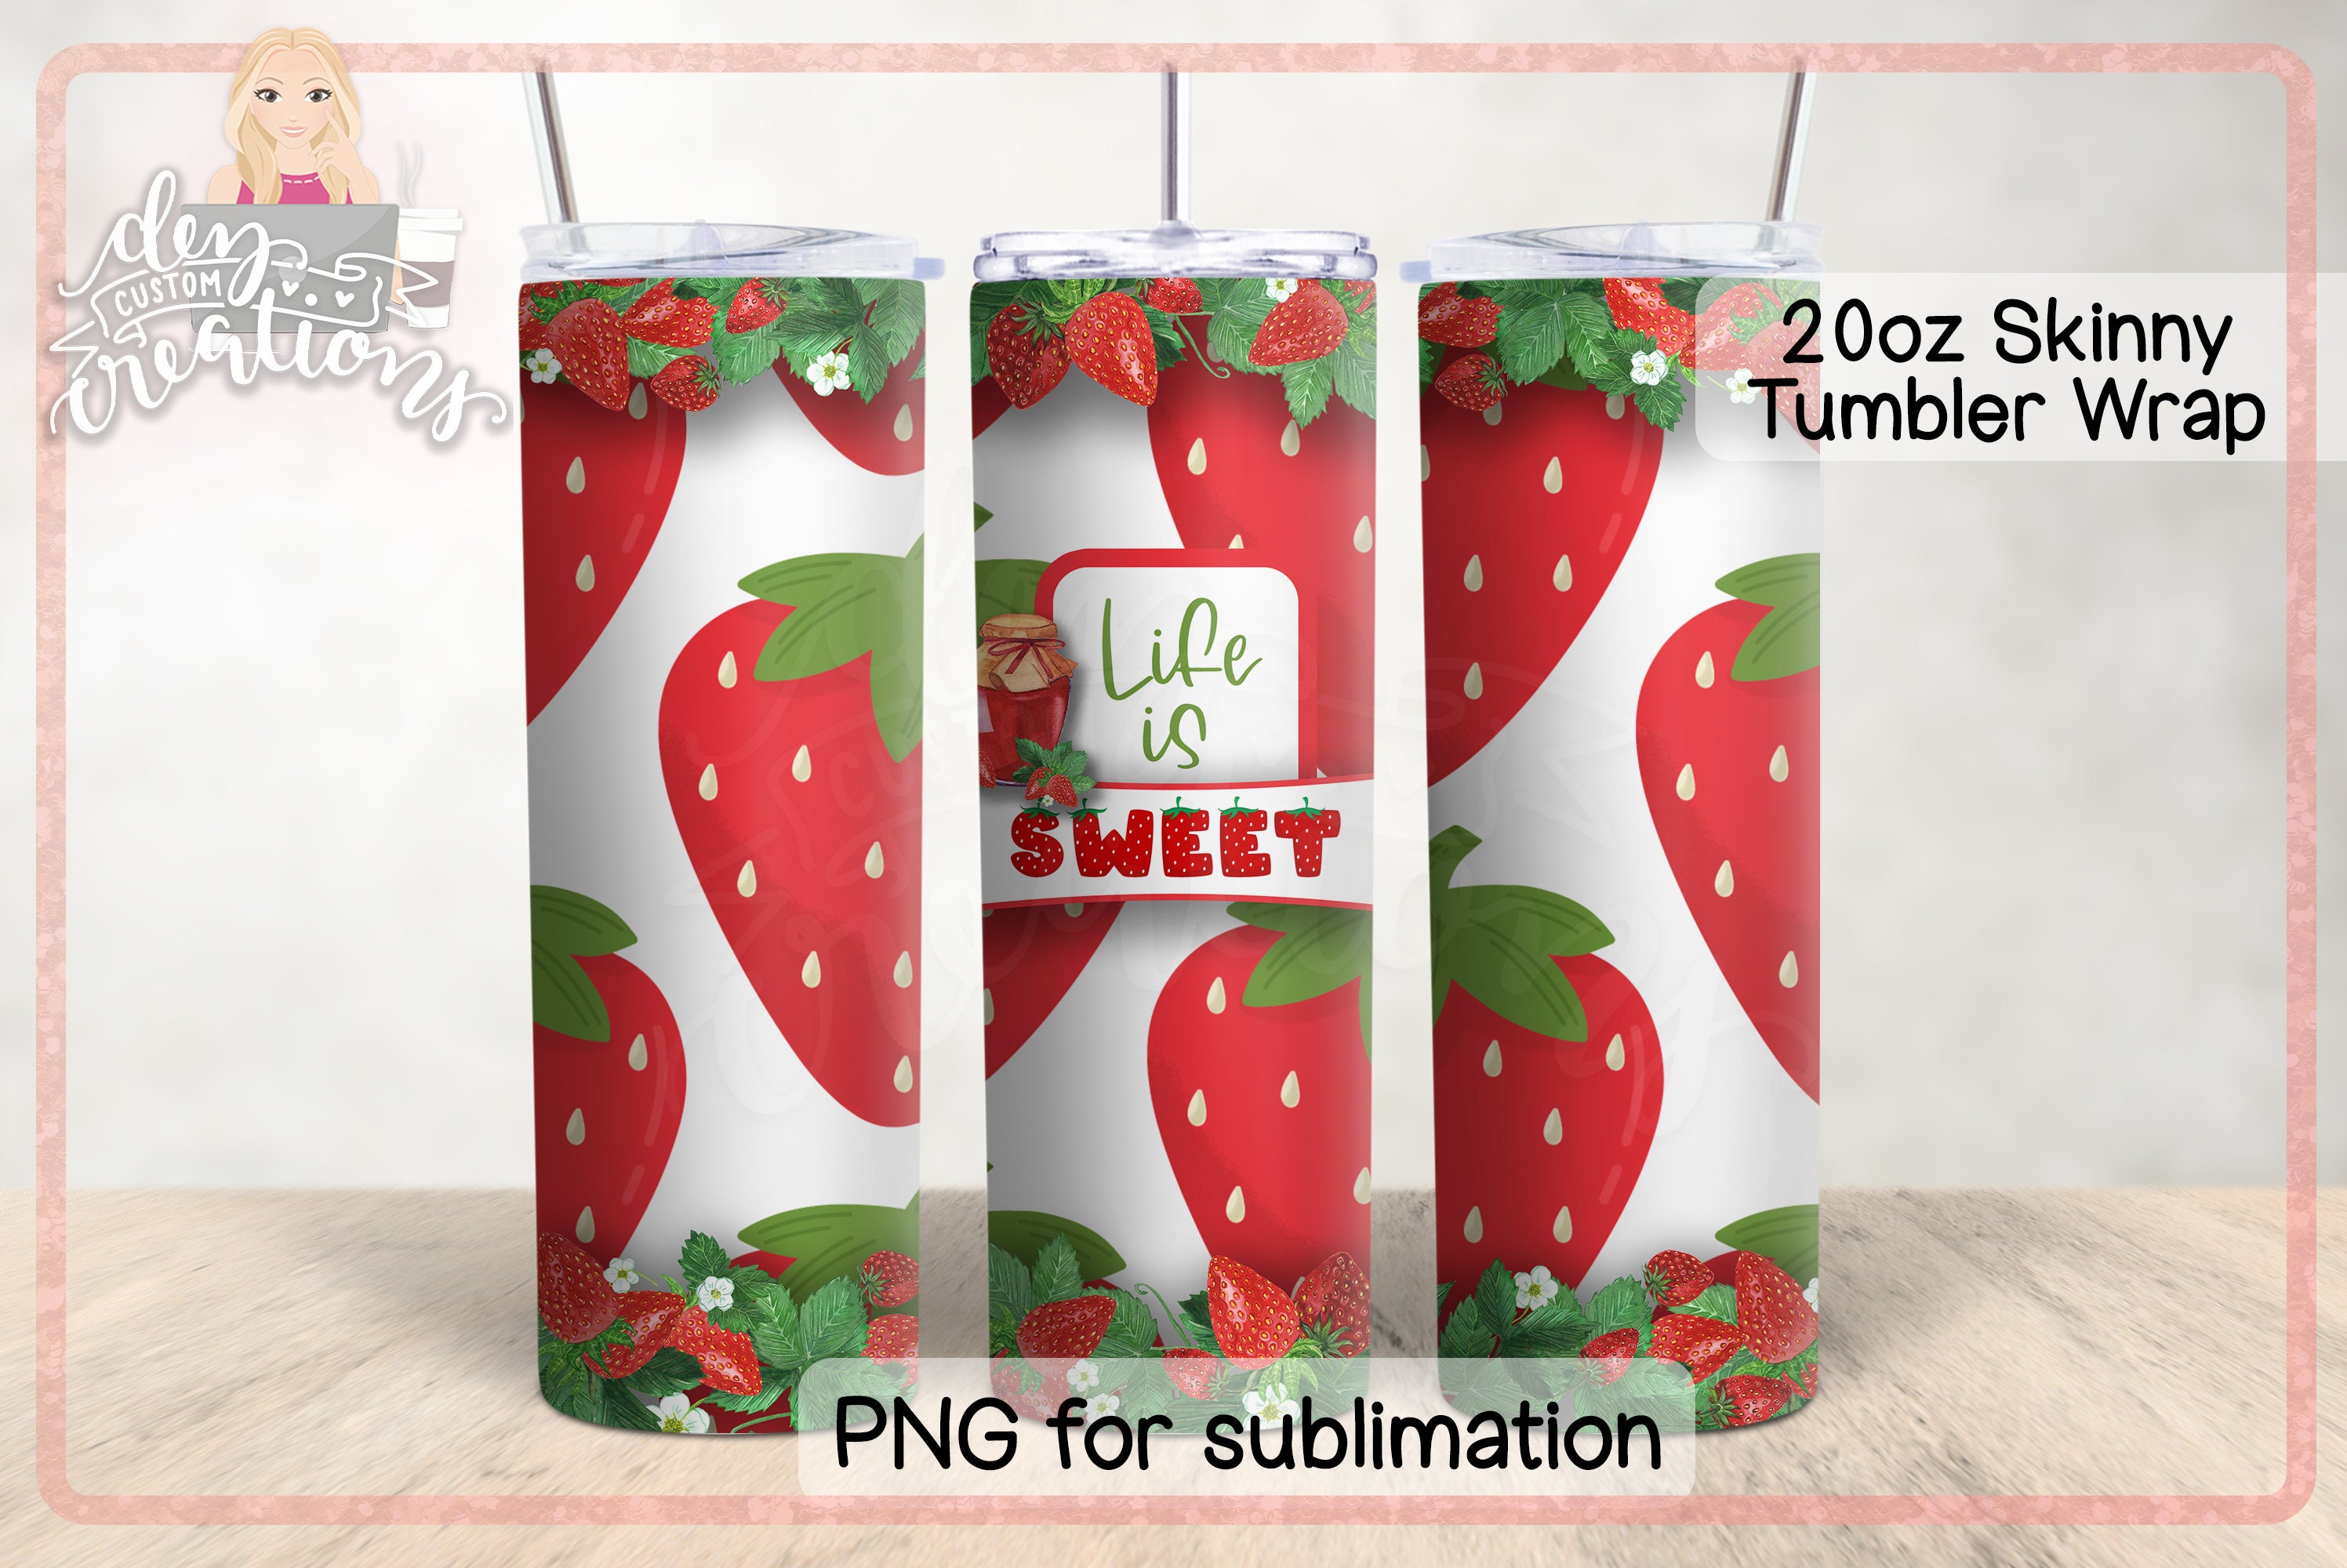 Strawberry Tumbler Png, Sublimation Wraps for Tumblers, Diy